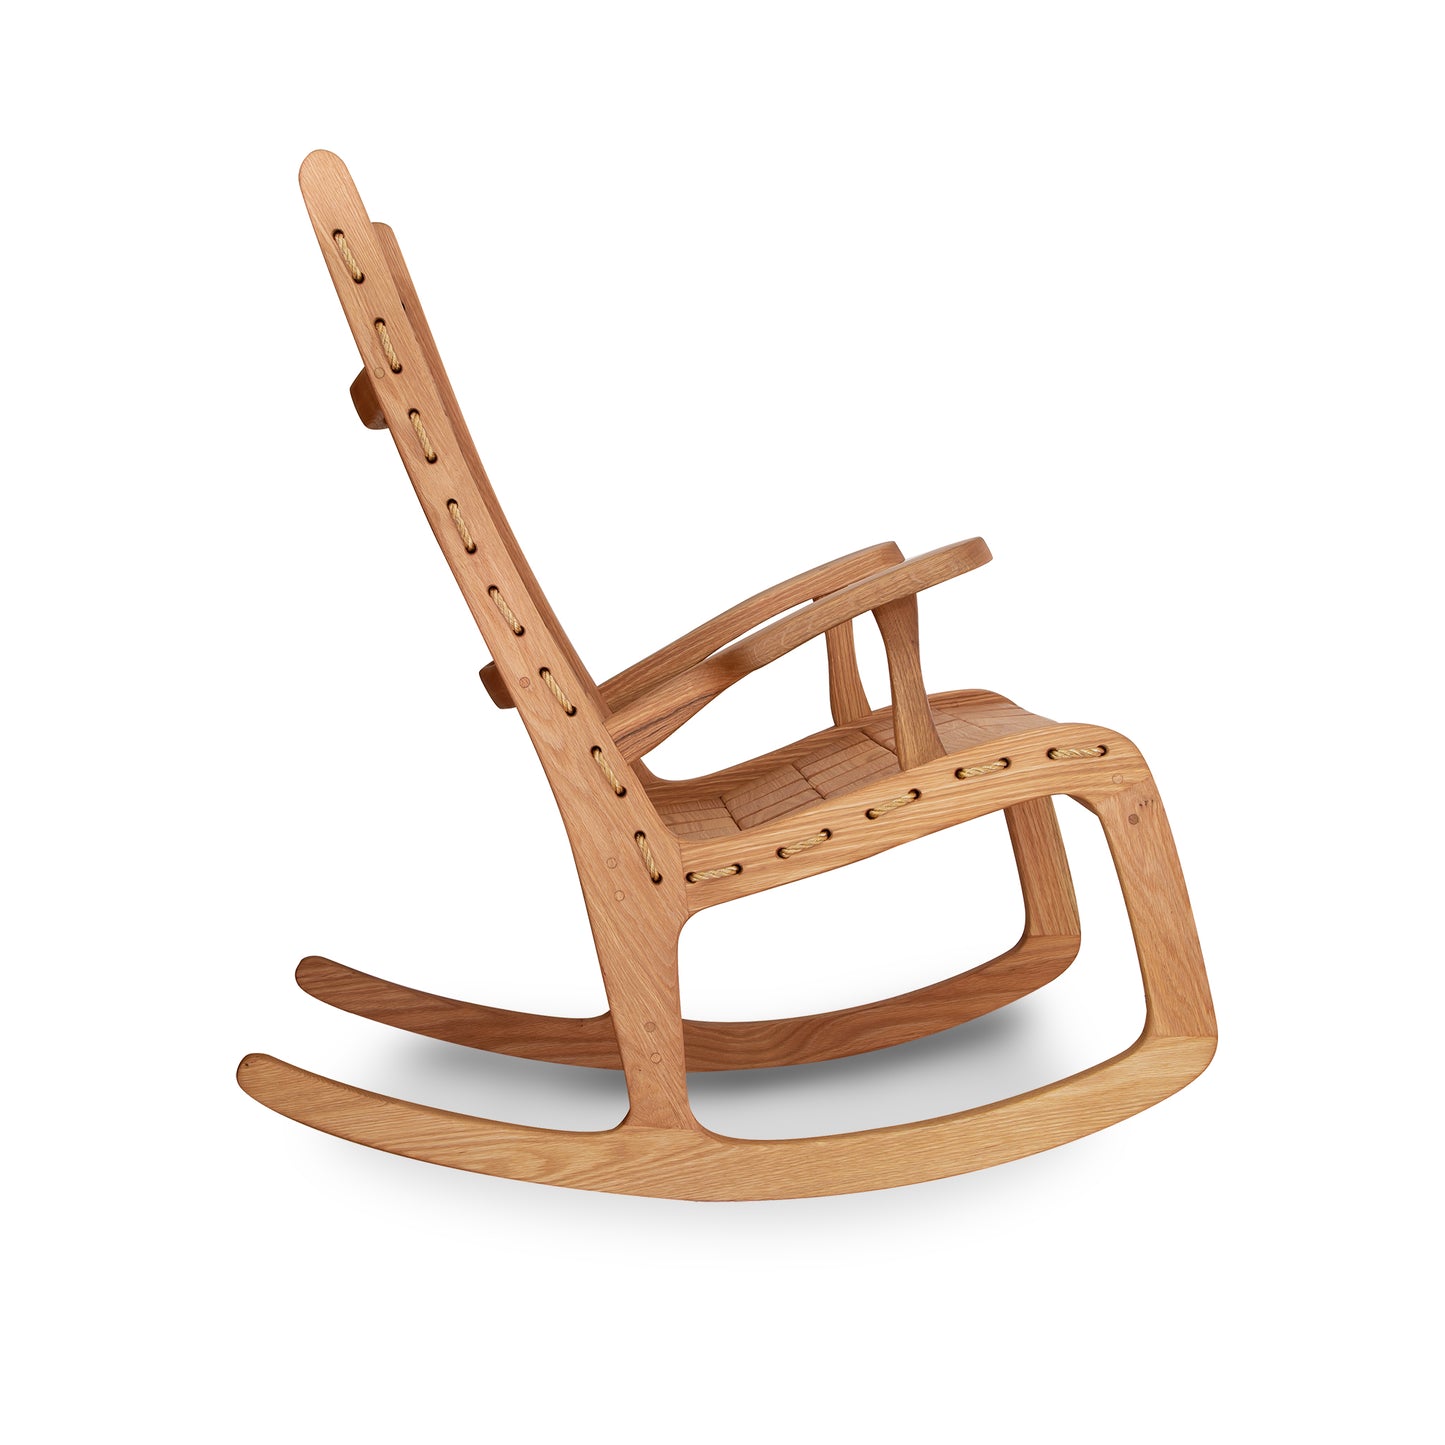 A Quilted Vermont Oak Rocking Chair by Vermont Folk Rocker, in a modern design, featuring a light oak finish with visible joinery details, positioned against a white background.